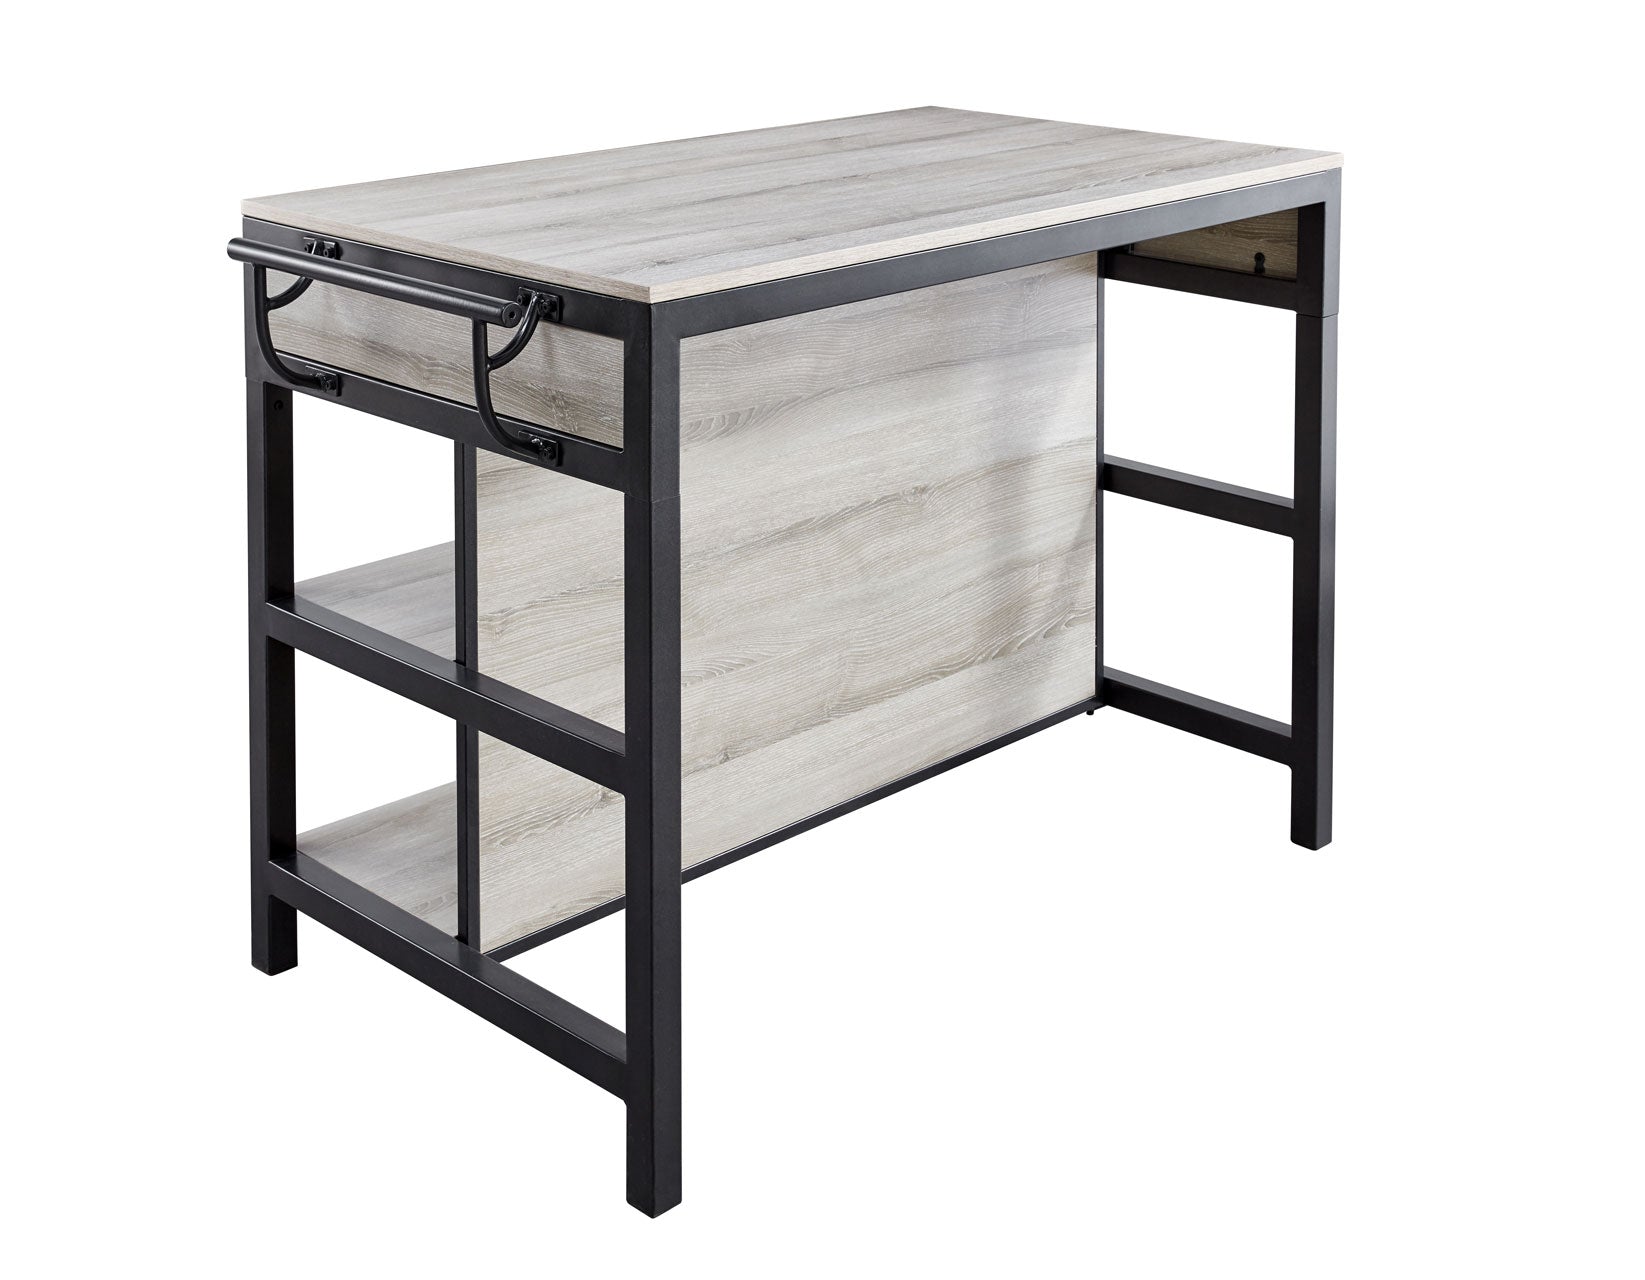 Carson 55-inch Counter Kitchen Table by Steve Silver